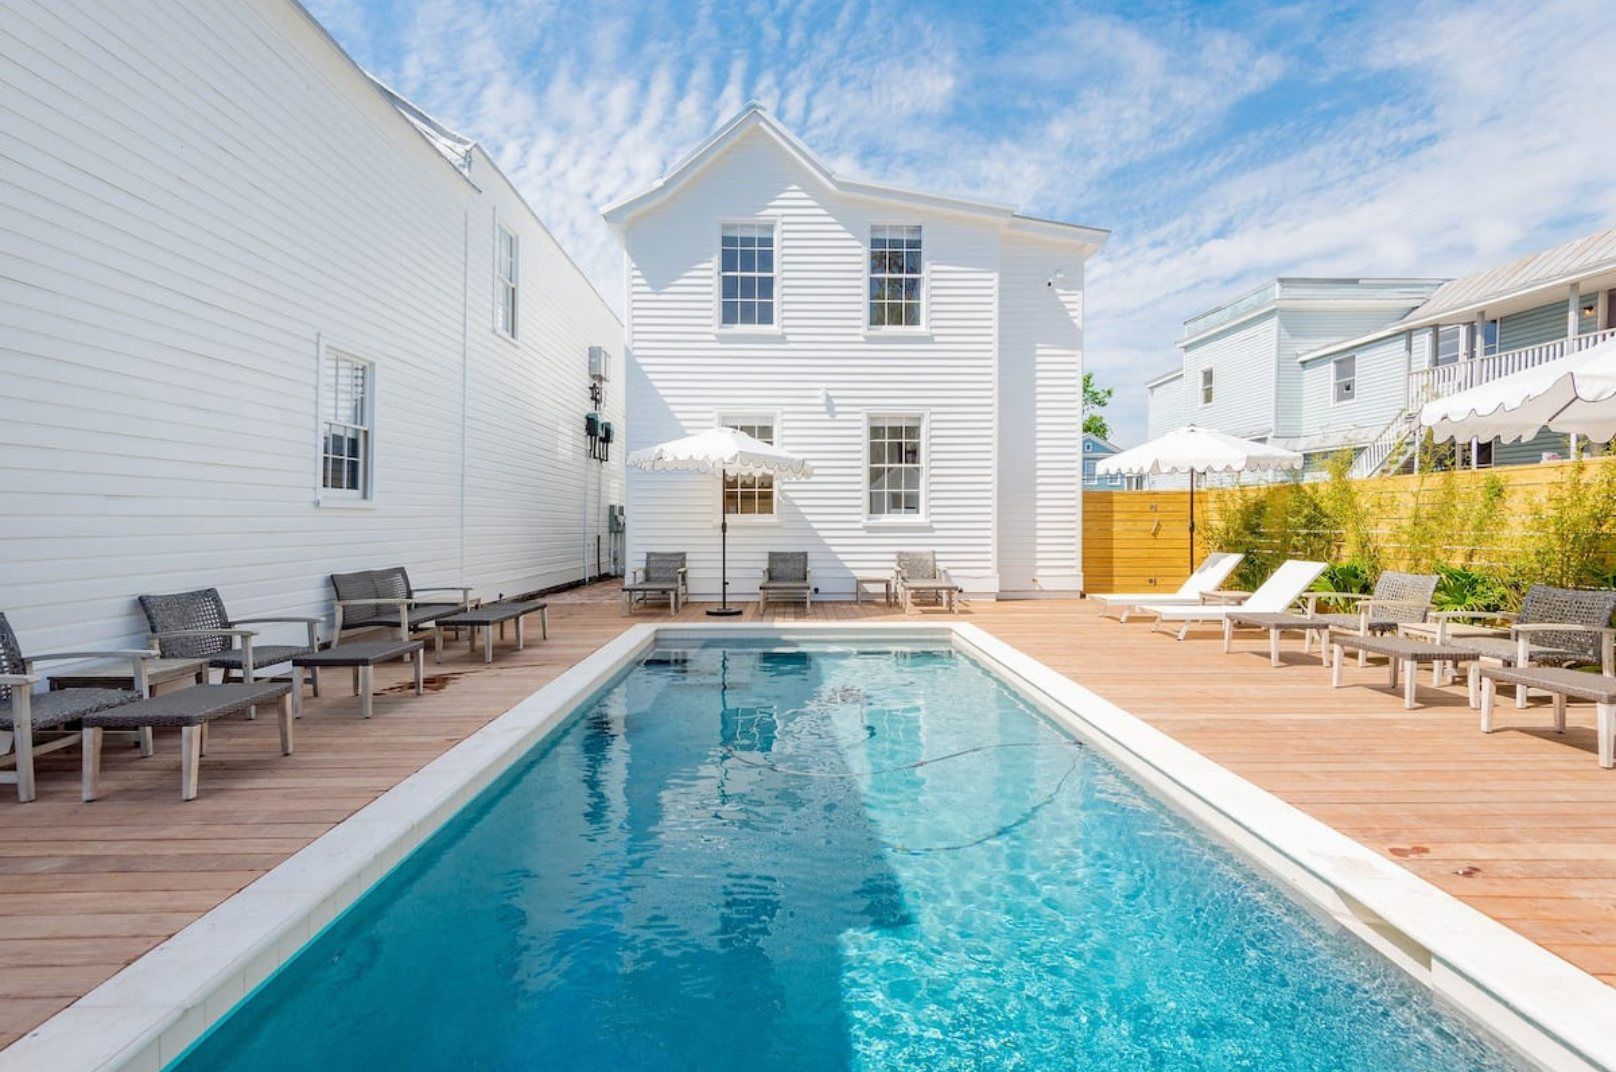 The Best Airbnbs in Charleston, SC